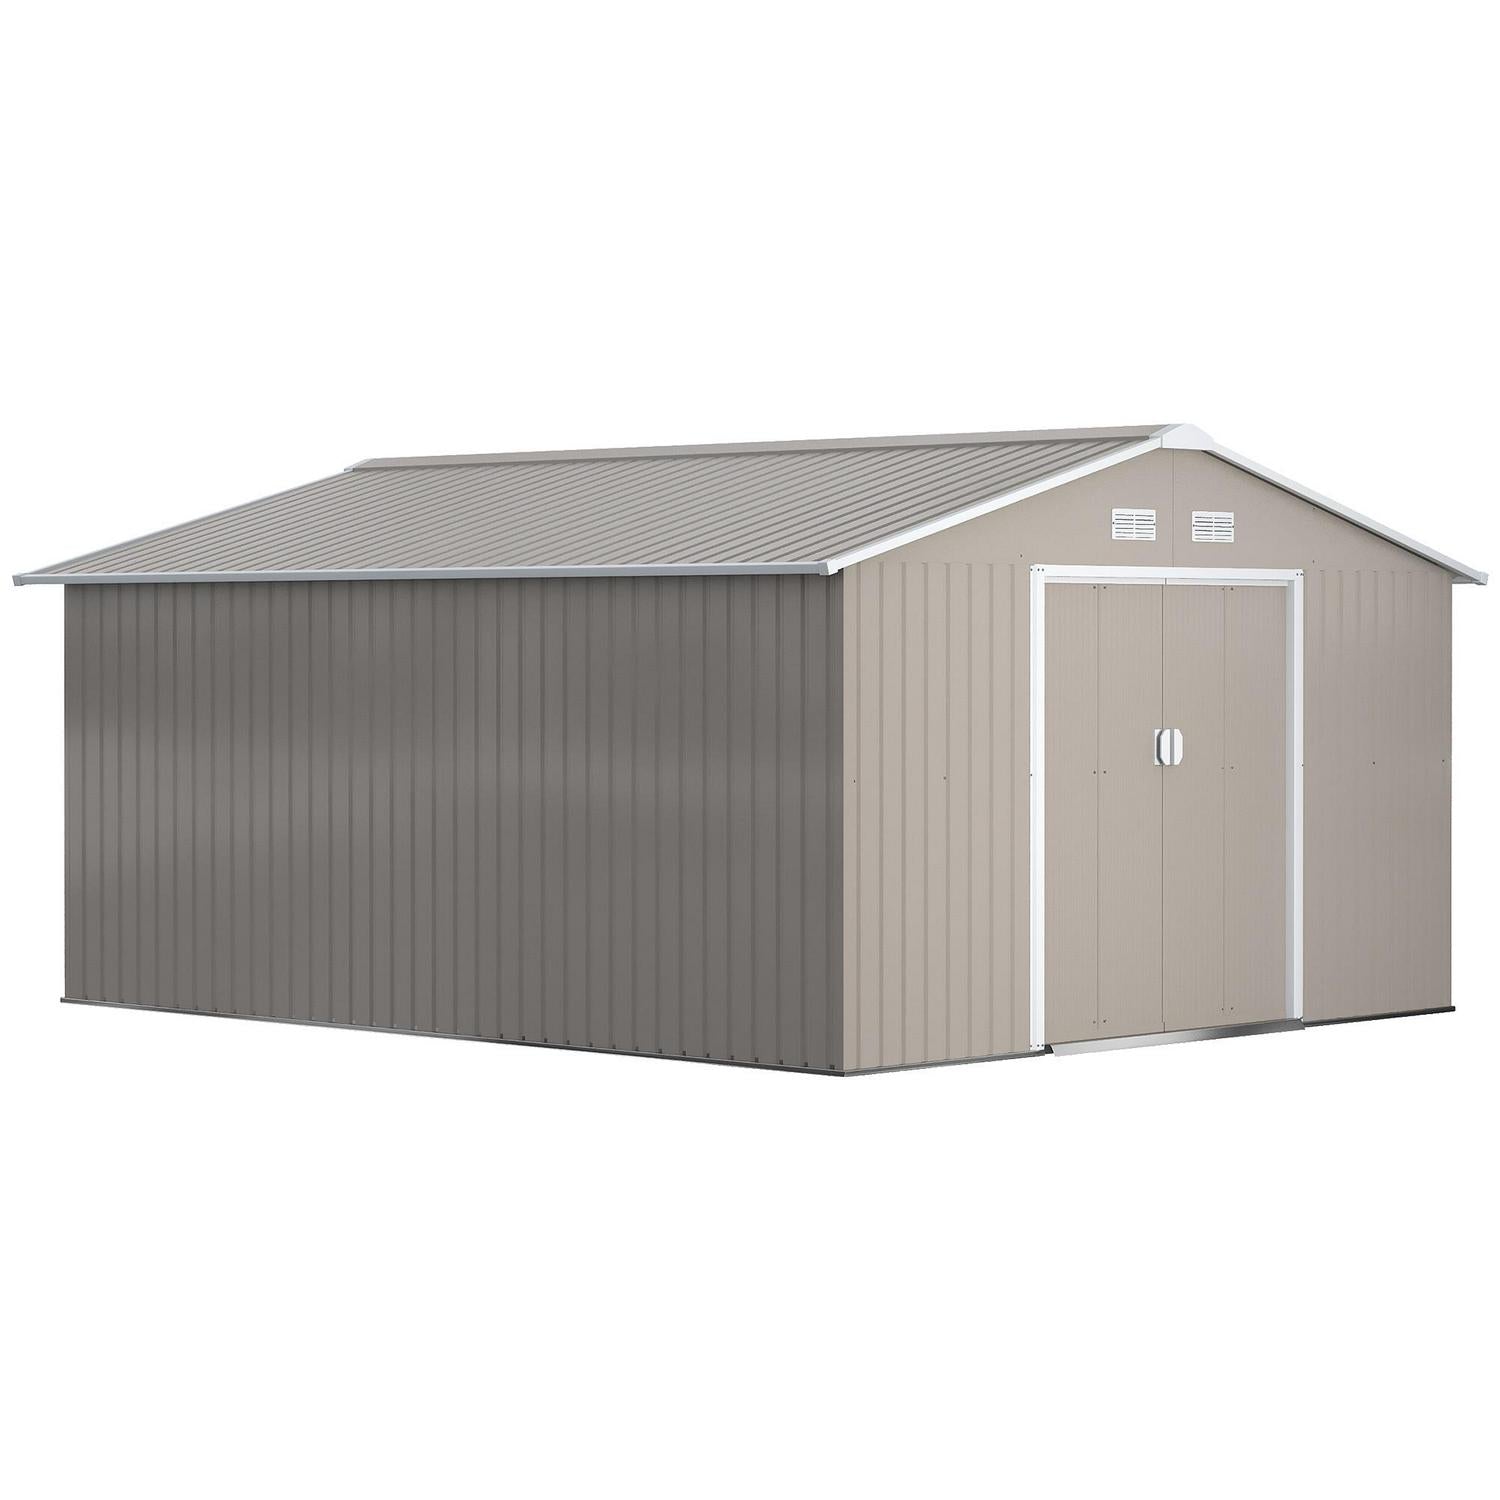 Garden Metal Storage Shed Outdoor With Foundation Ventilation And Doors, Light Grey (13 X 11)ft